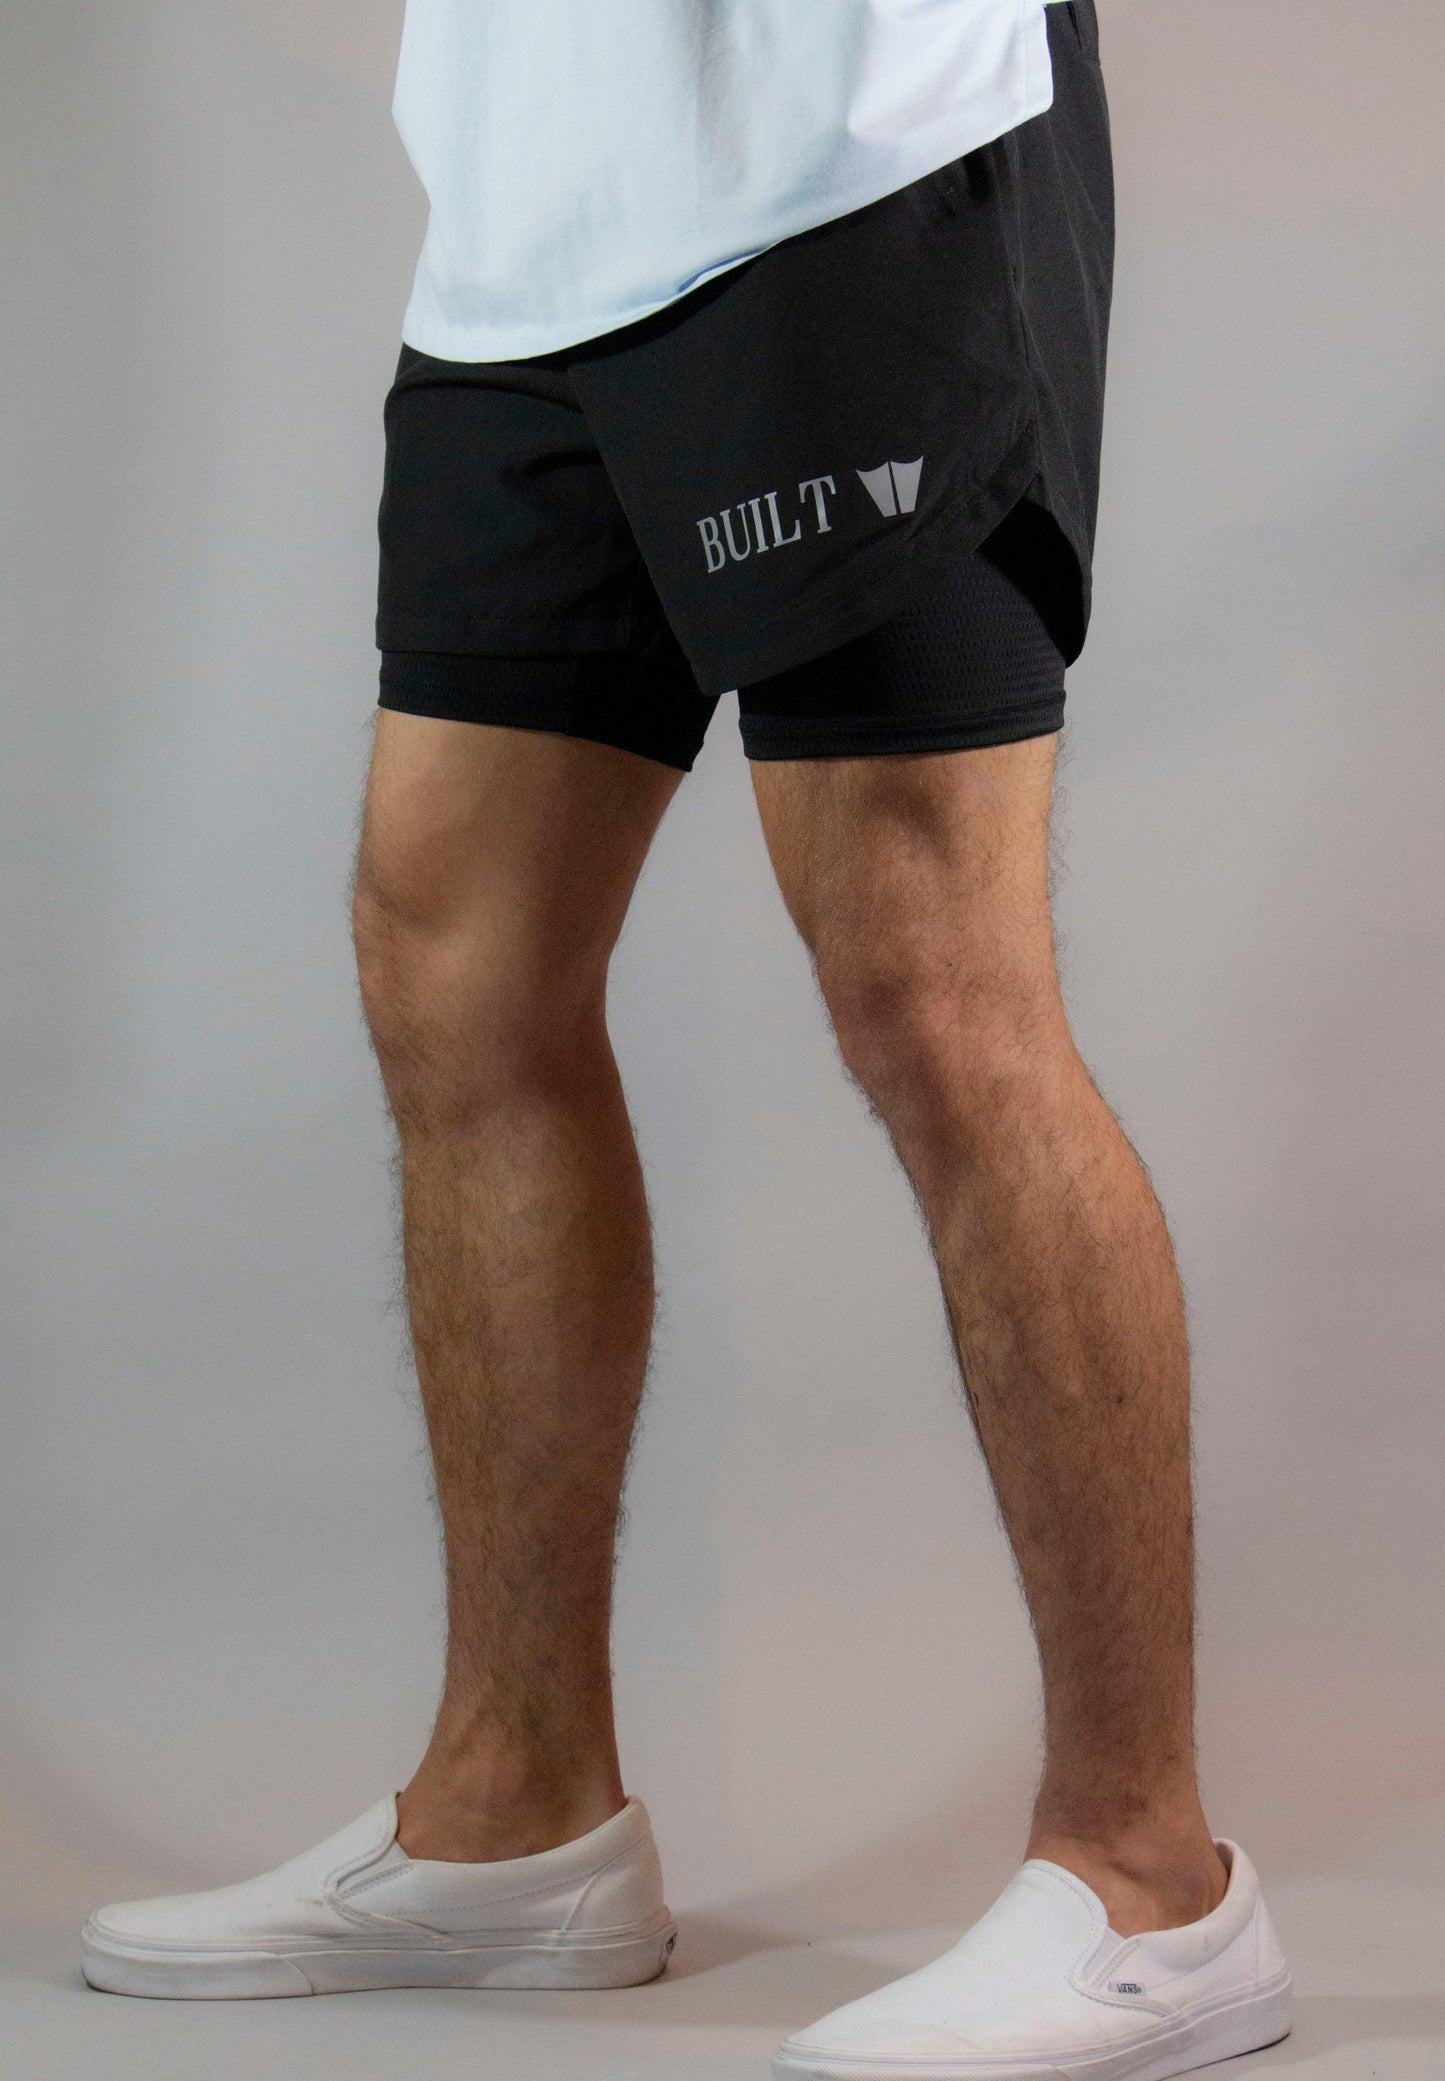 Two in one Athletic Shorts 5" Black - builtwear